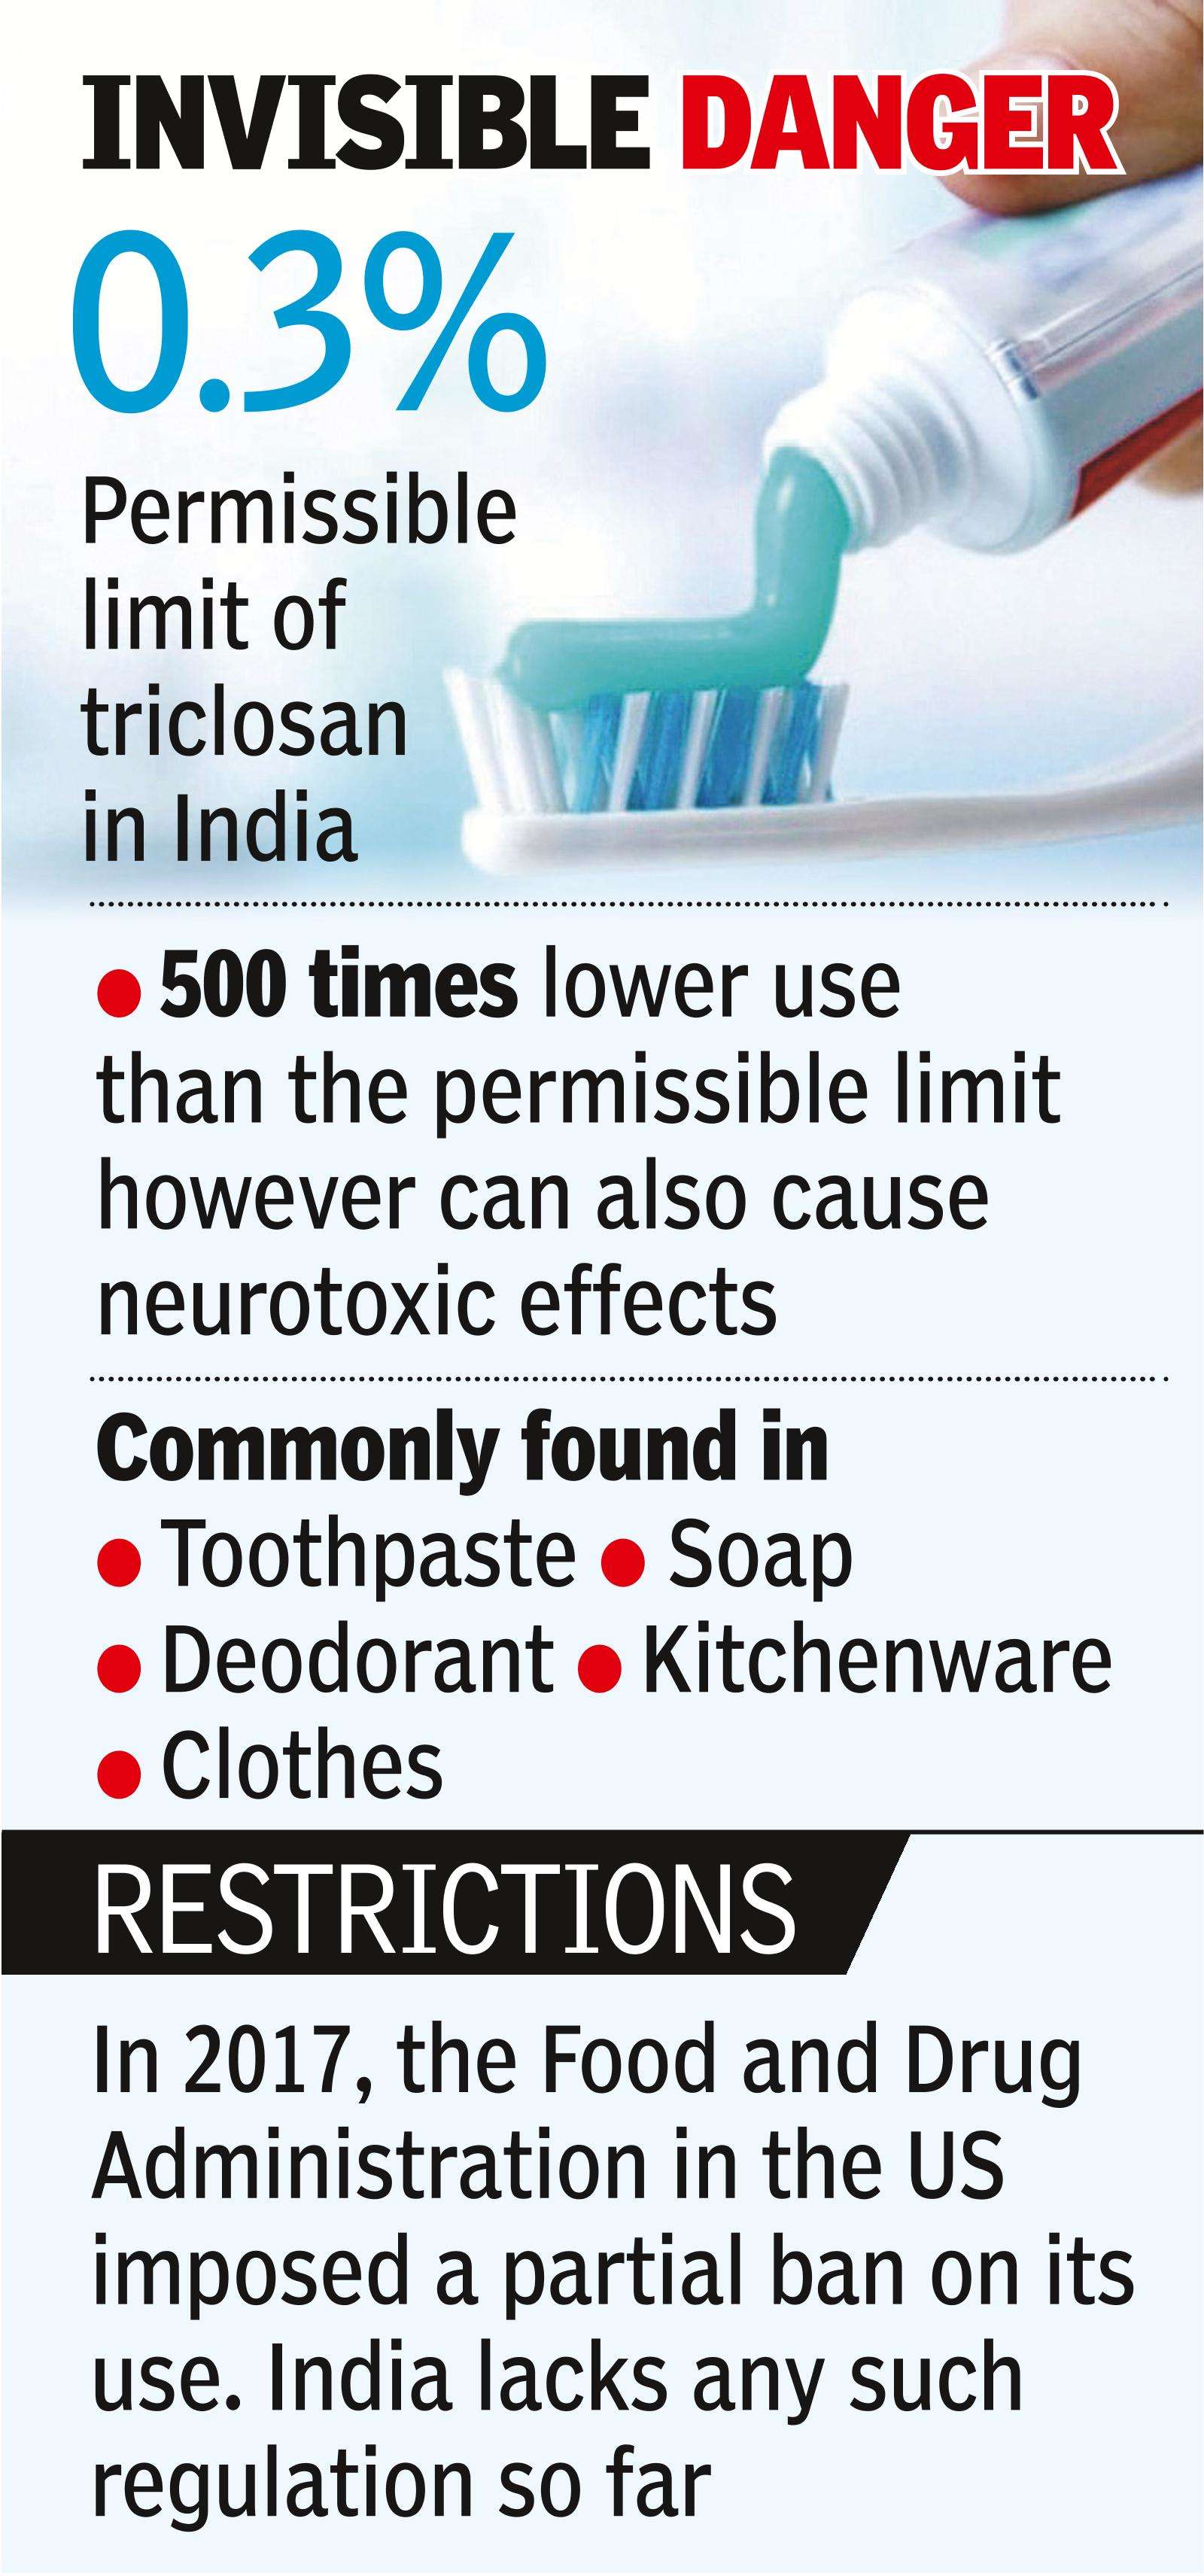 Triclosan in soap, toothpaste harmful to health: IIT-H